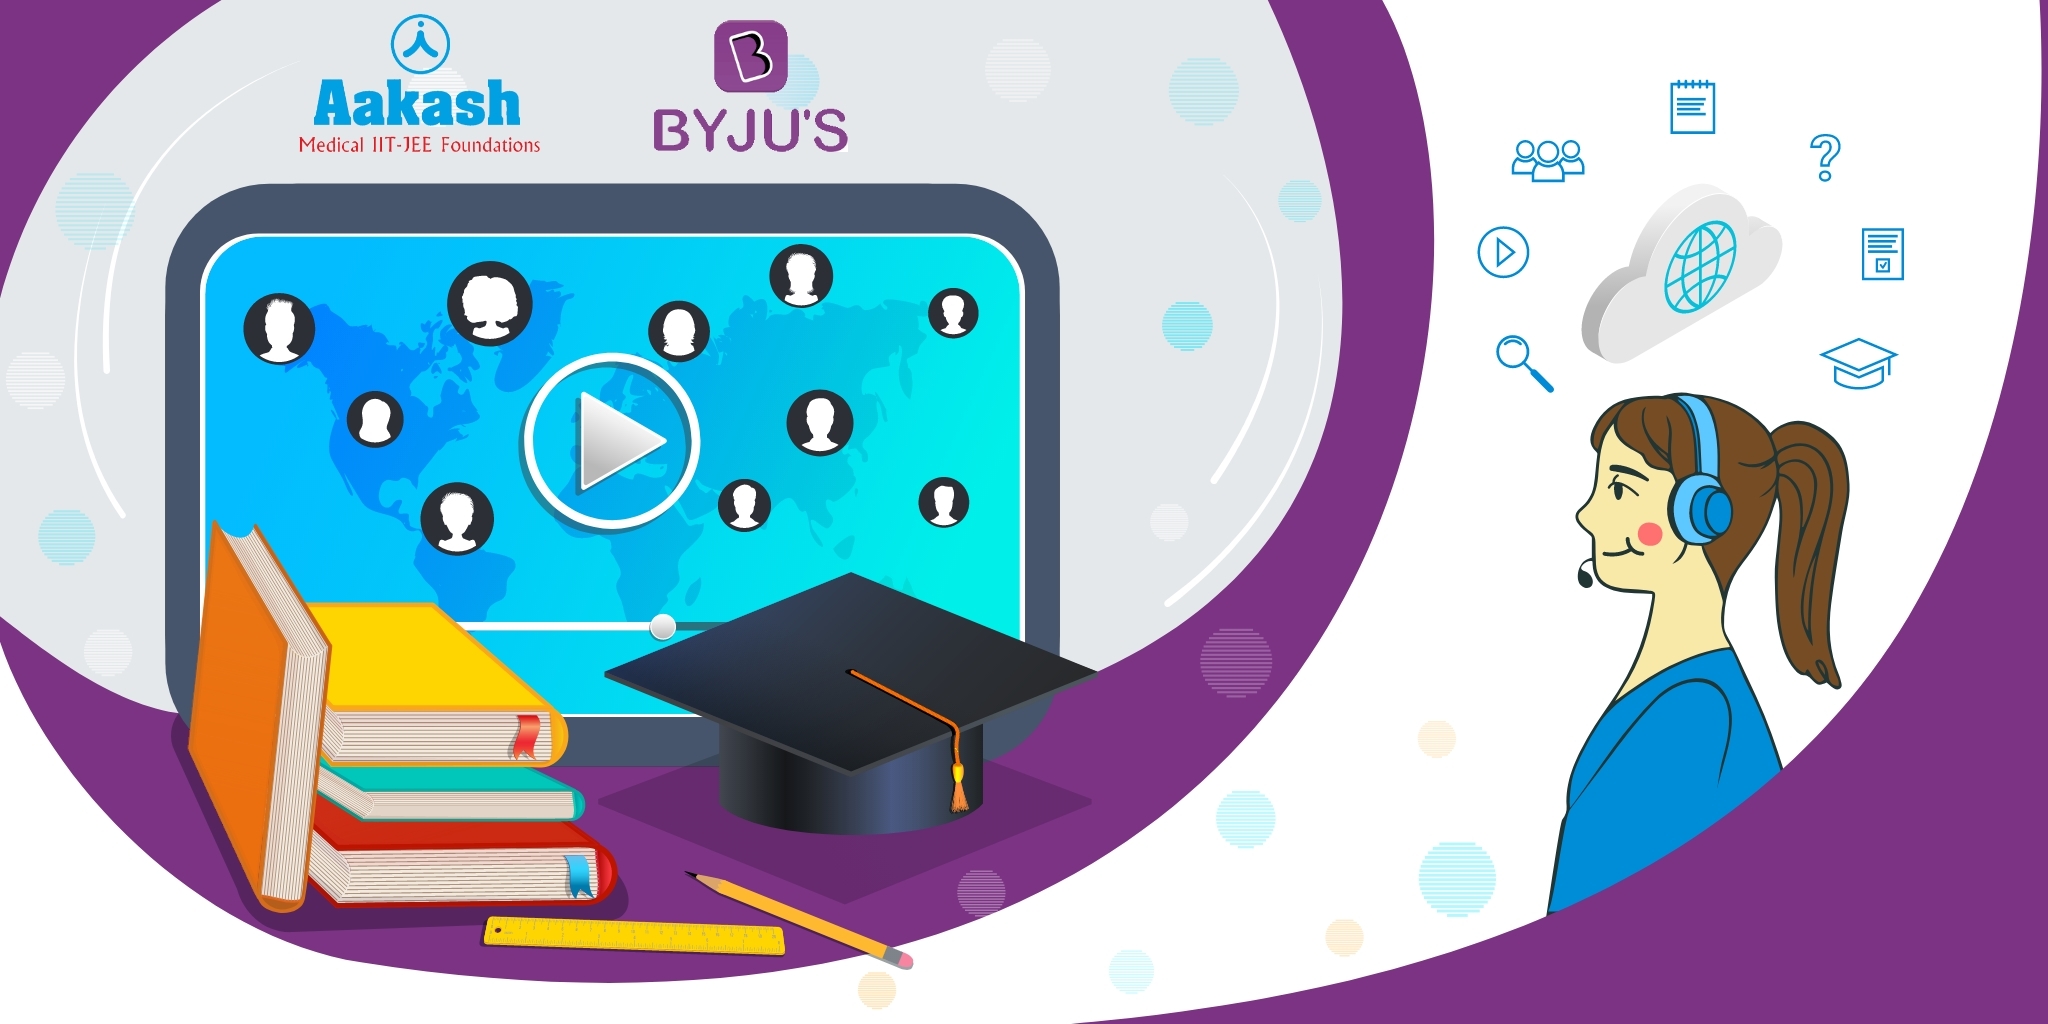 How Byju’s Acquiring Akash is Motivation for eLearning App Development?